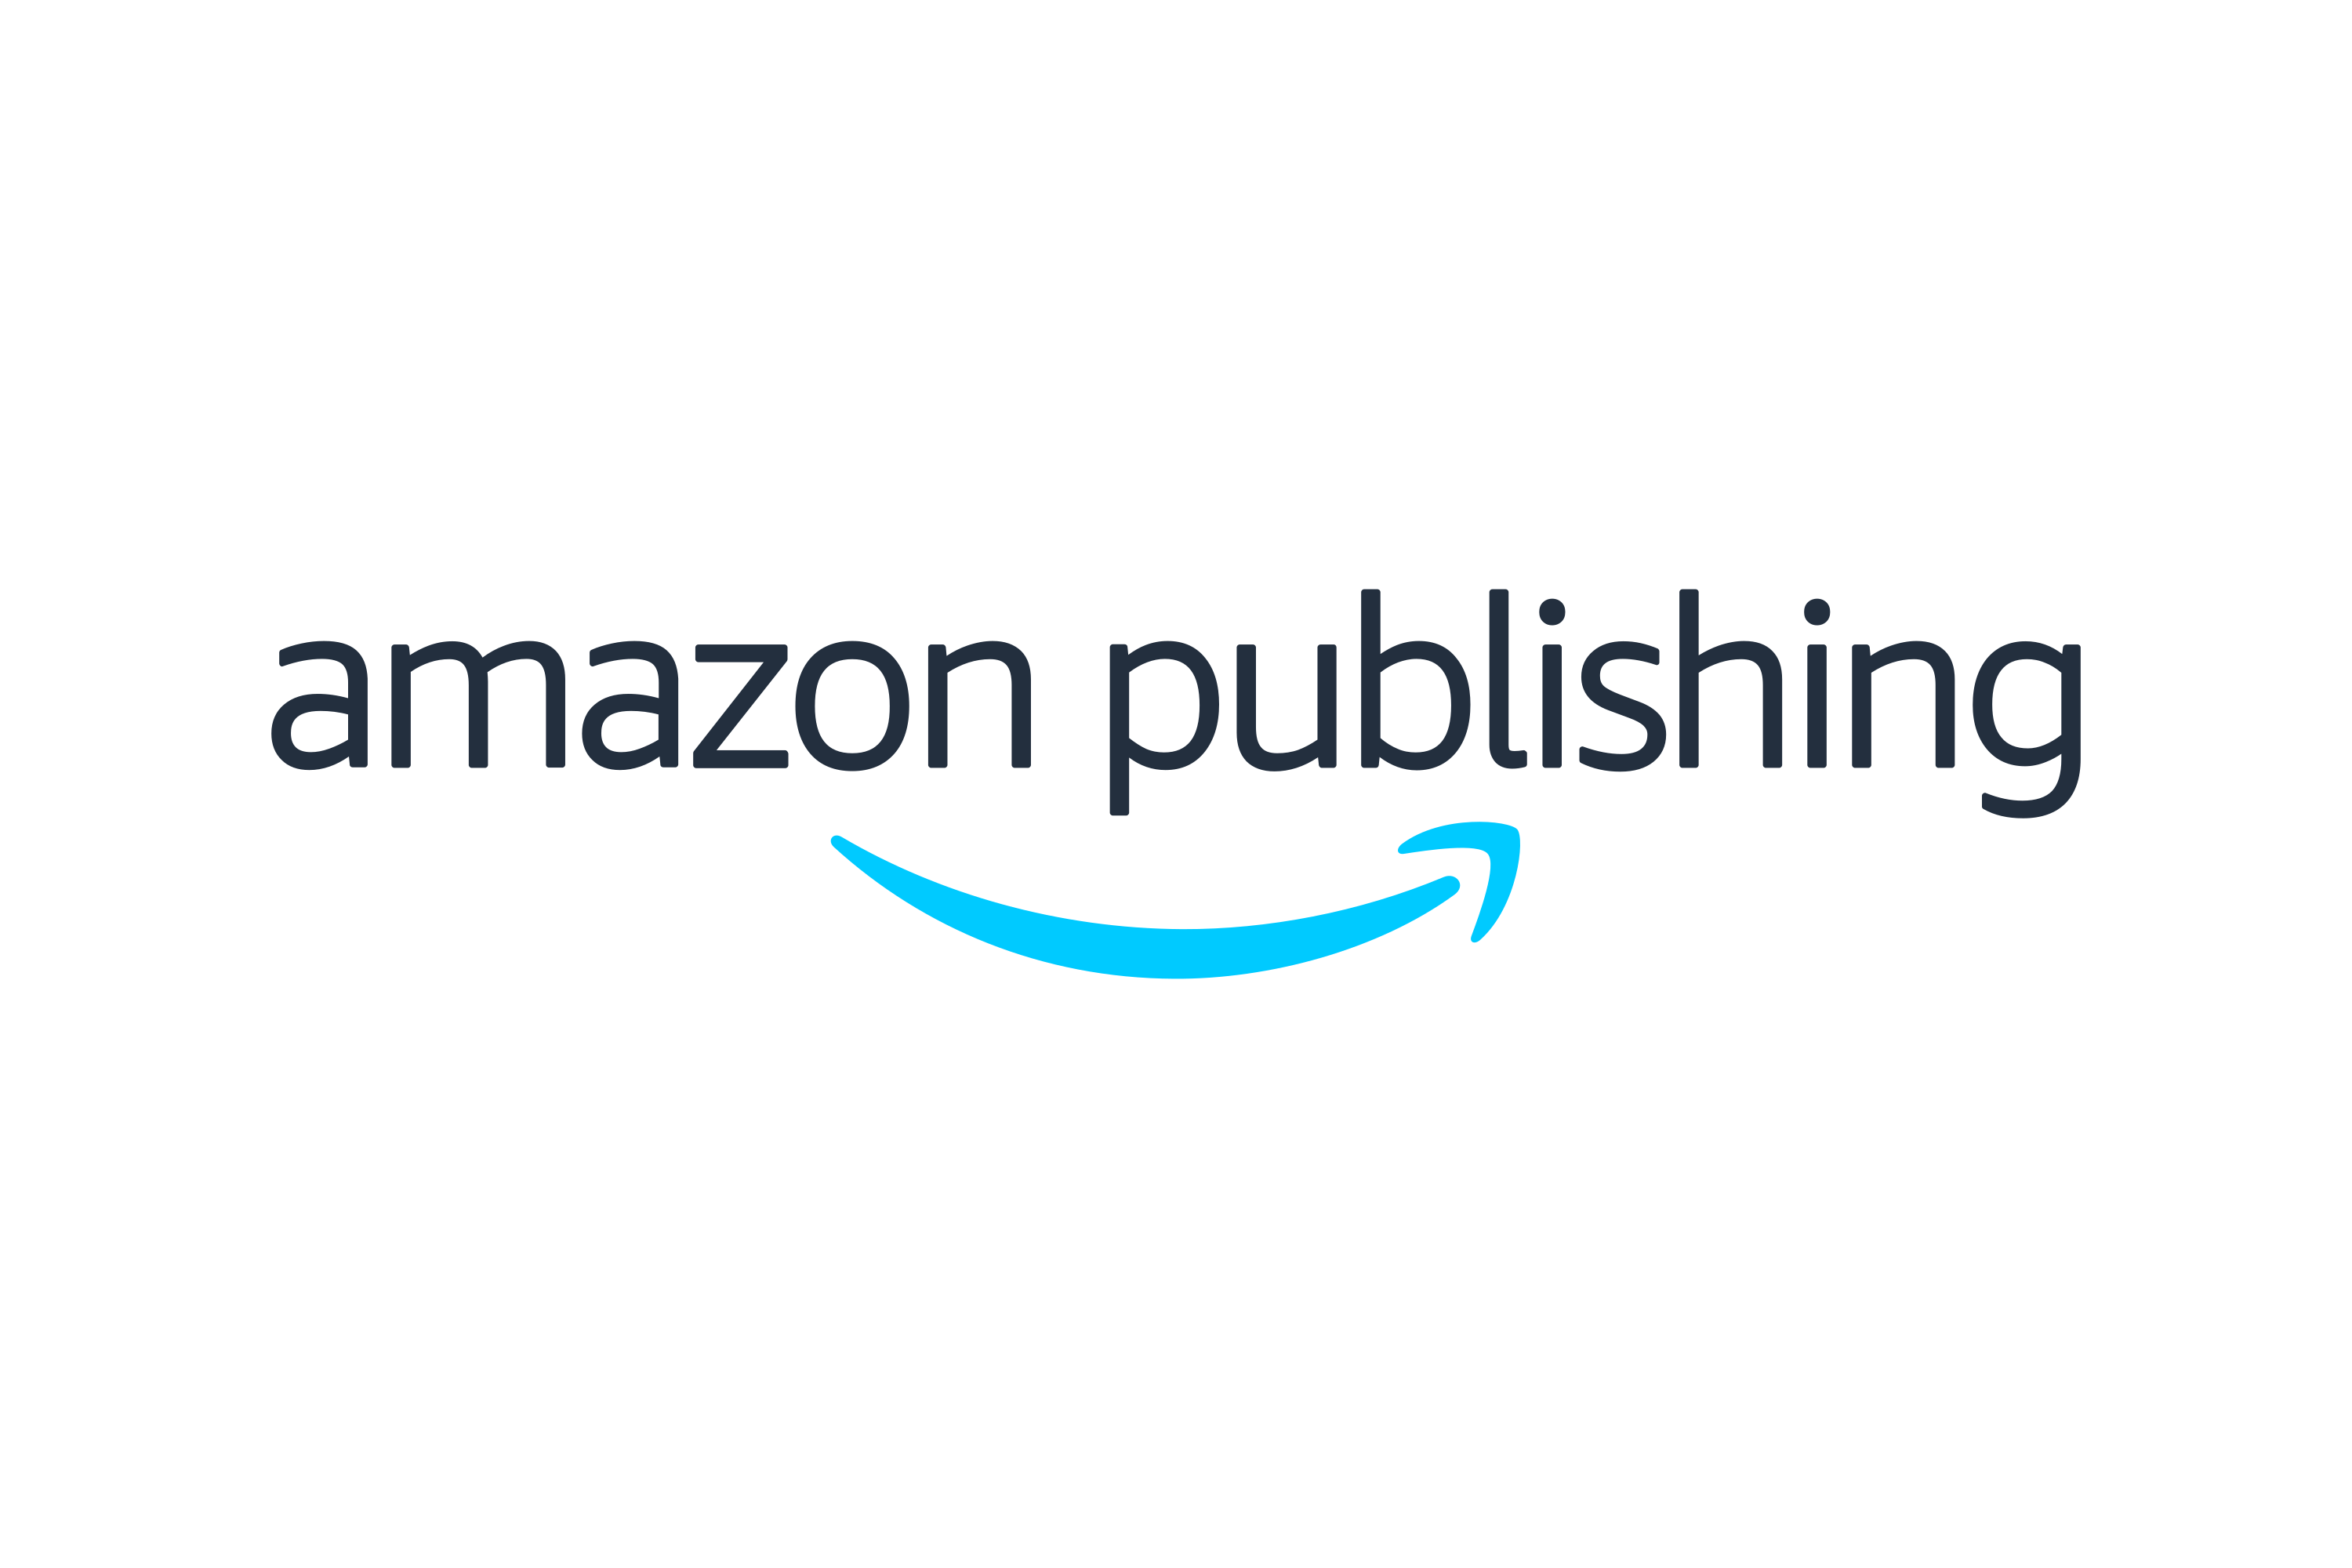 Download Amazon Publishing Apub Logo In Svg Vector Or Png File Format Logo Wine